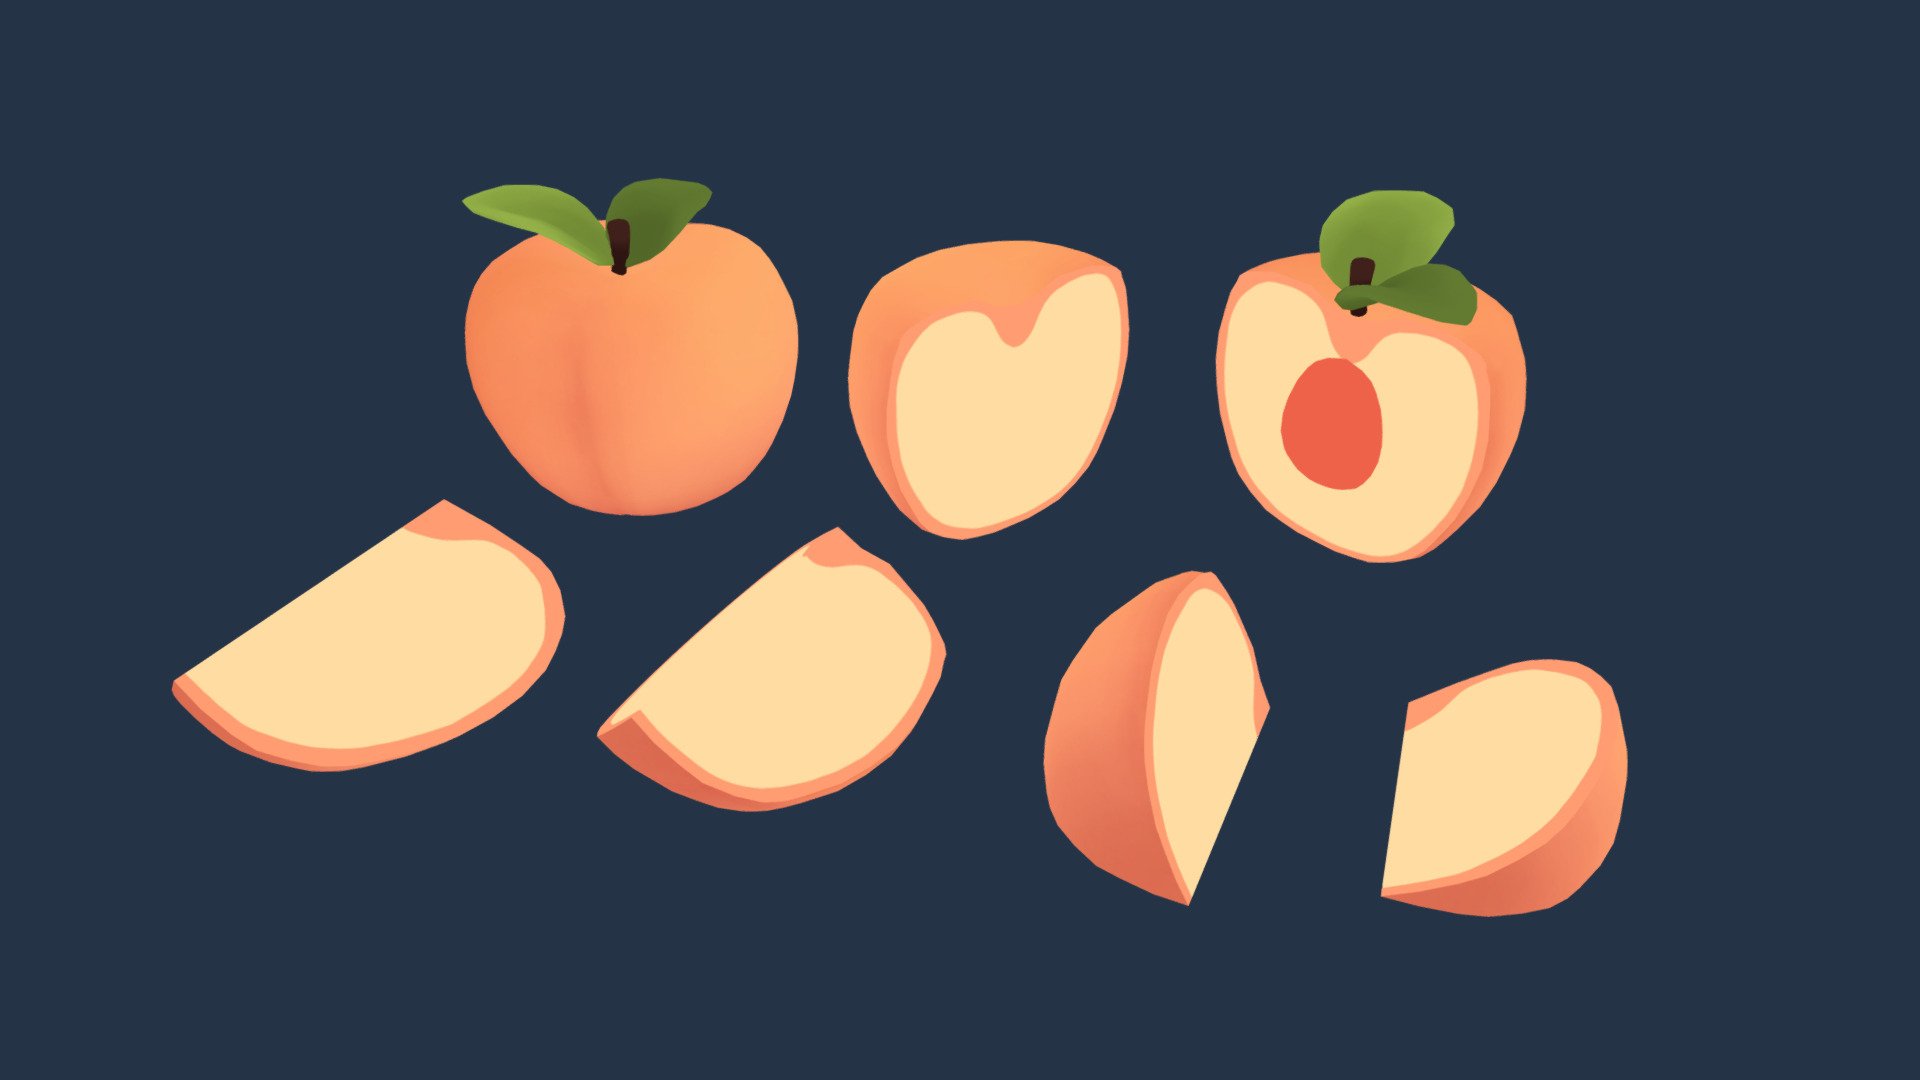 A cute, simple peach with a colourful, cartoon style 🍑

Part of the Cute Fruits Pack! See the full model pack here 👑✨

Includes:

1 whole peach mesh

2 peach half meshes

2 peach quarter meshes

2 peach slice meshes

2 texture .pngs

Zip file contains the models as an .fbx file - Cute Peach - Buy Royalty Free 3D model by pixelatedcrown 3d model